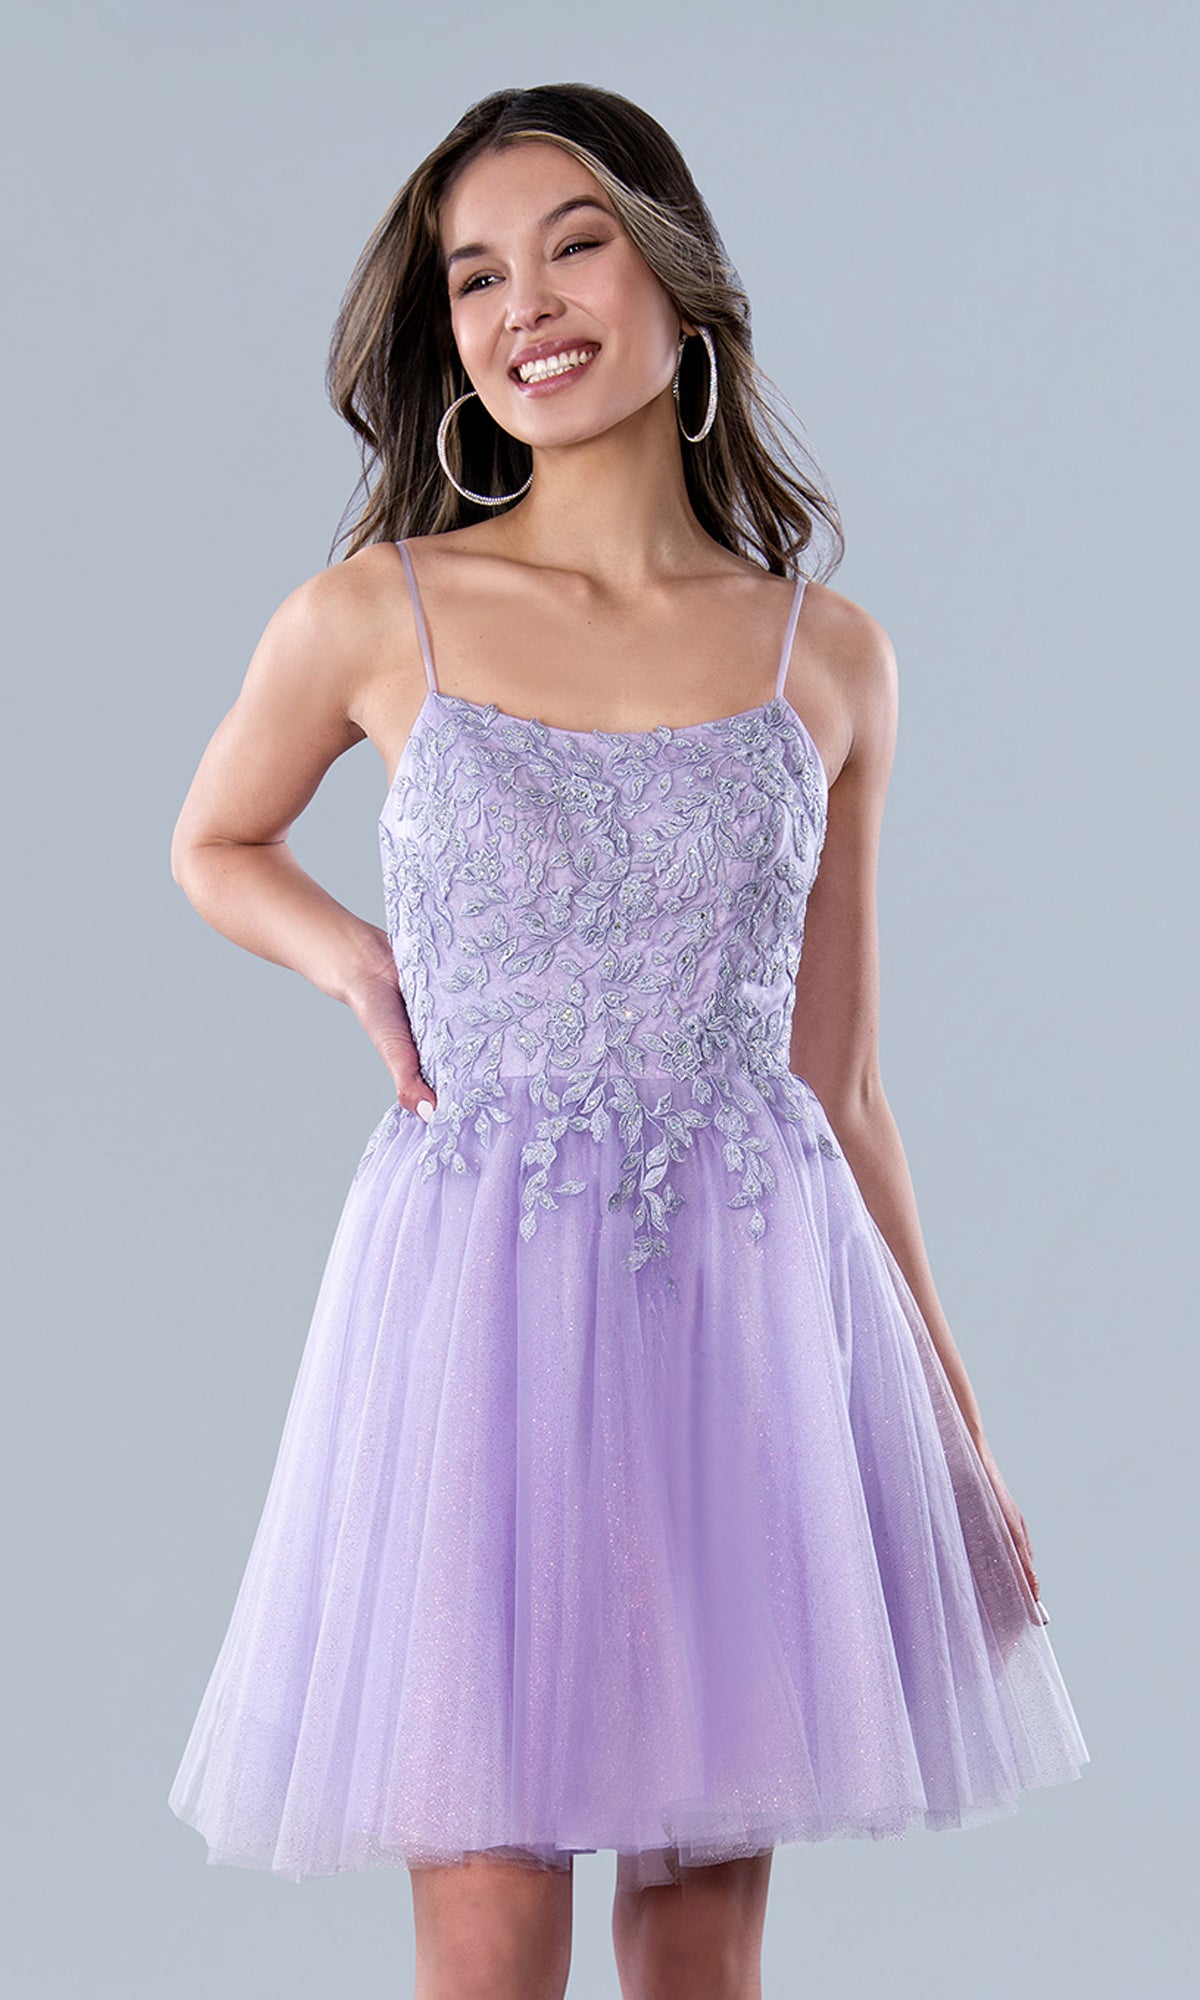 Lace-Bodice Short Lilac Homecoming Dress - PromGirl